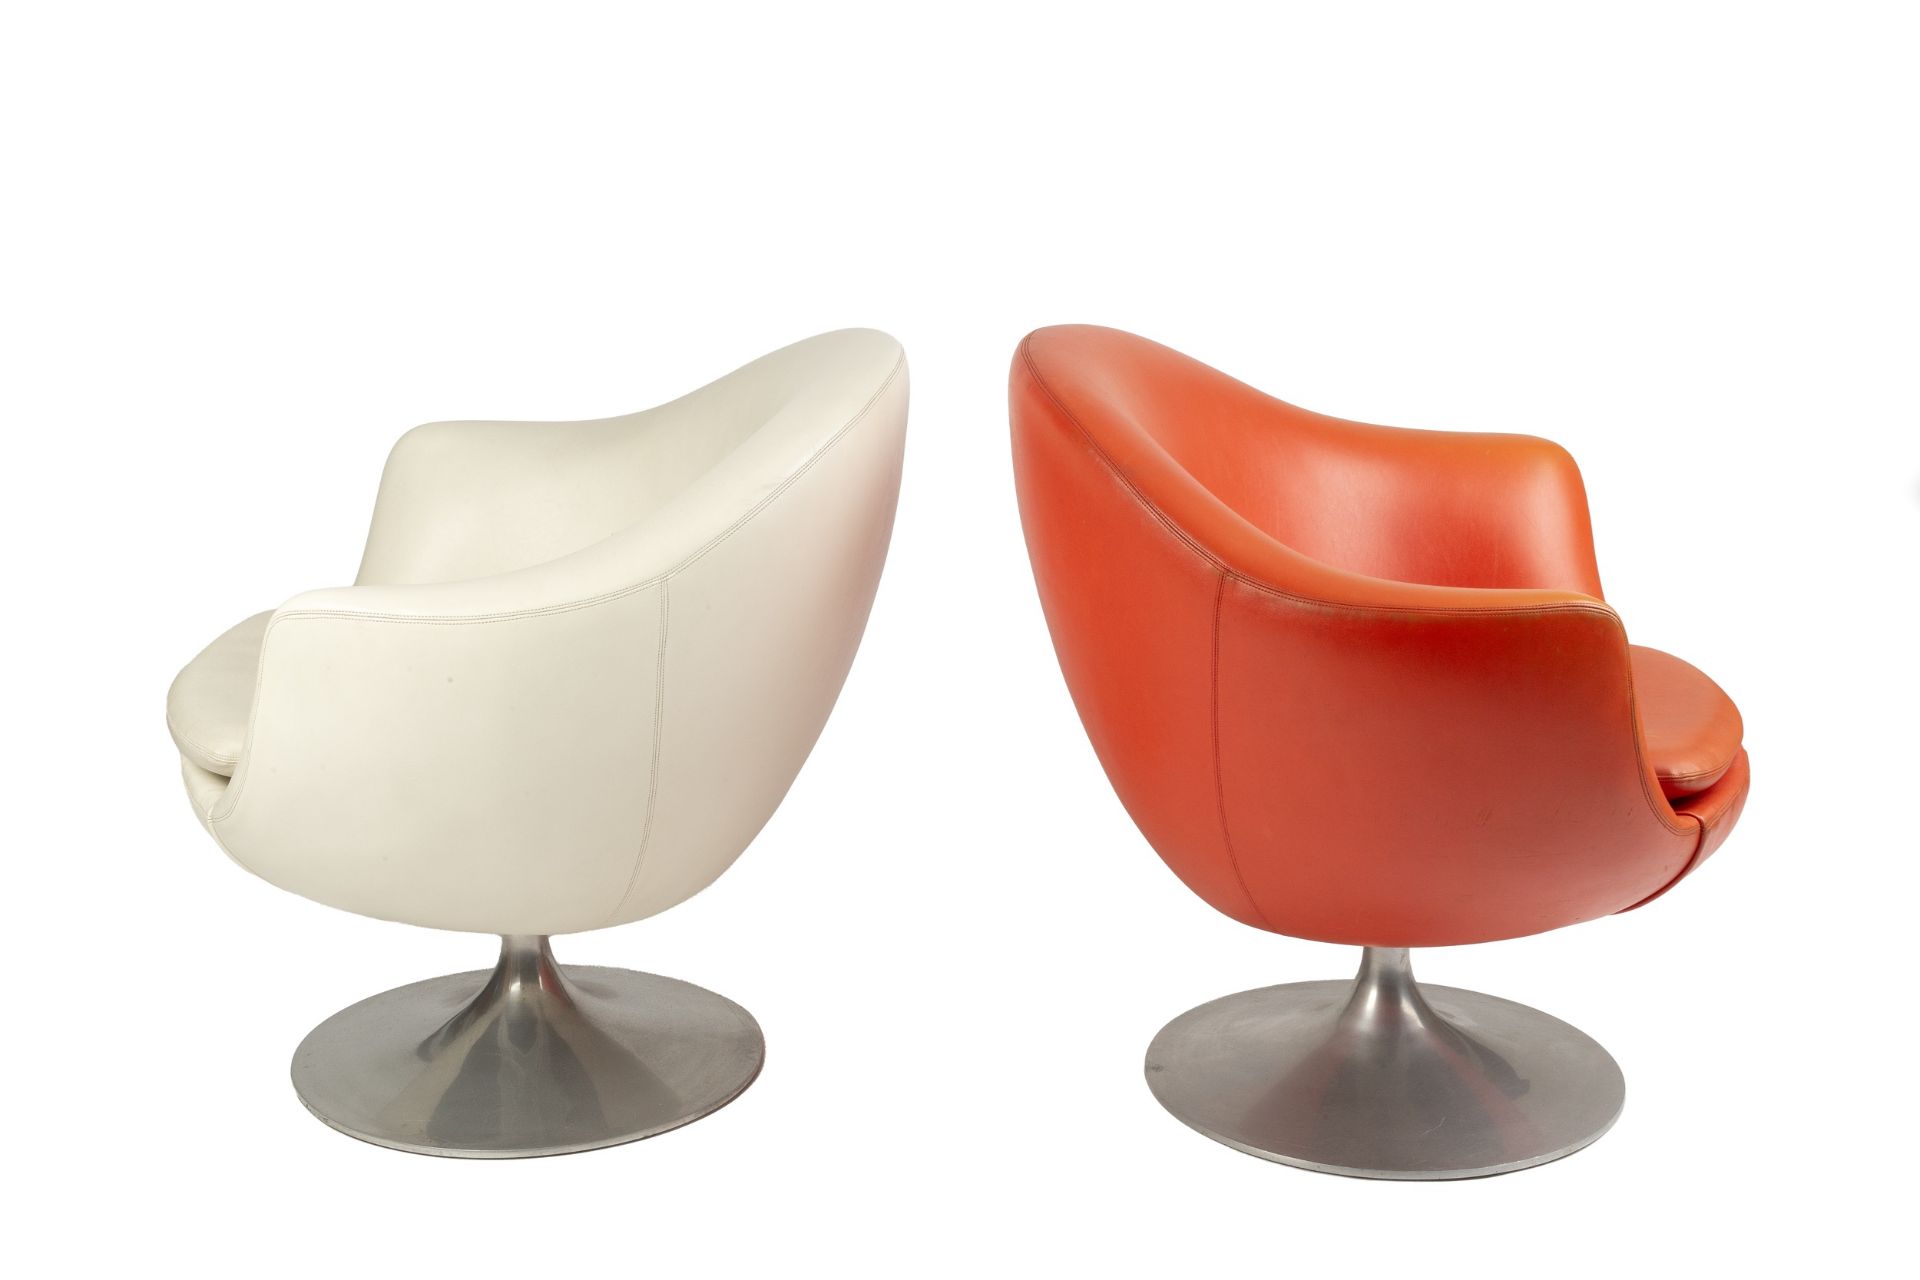 Eero Saarinen (1910-1961) Two swivel armchairs red and white upholstery on an aluminium base 70cm - Image 2 of 3